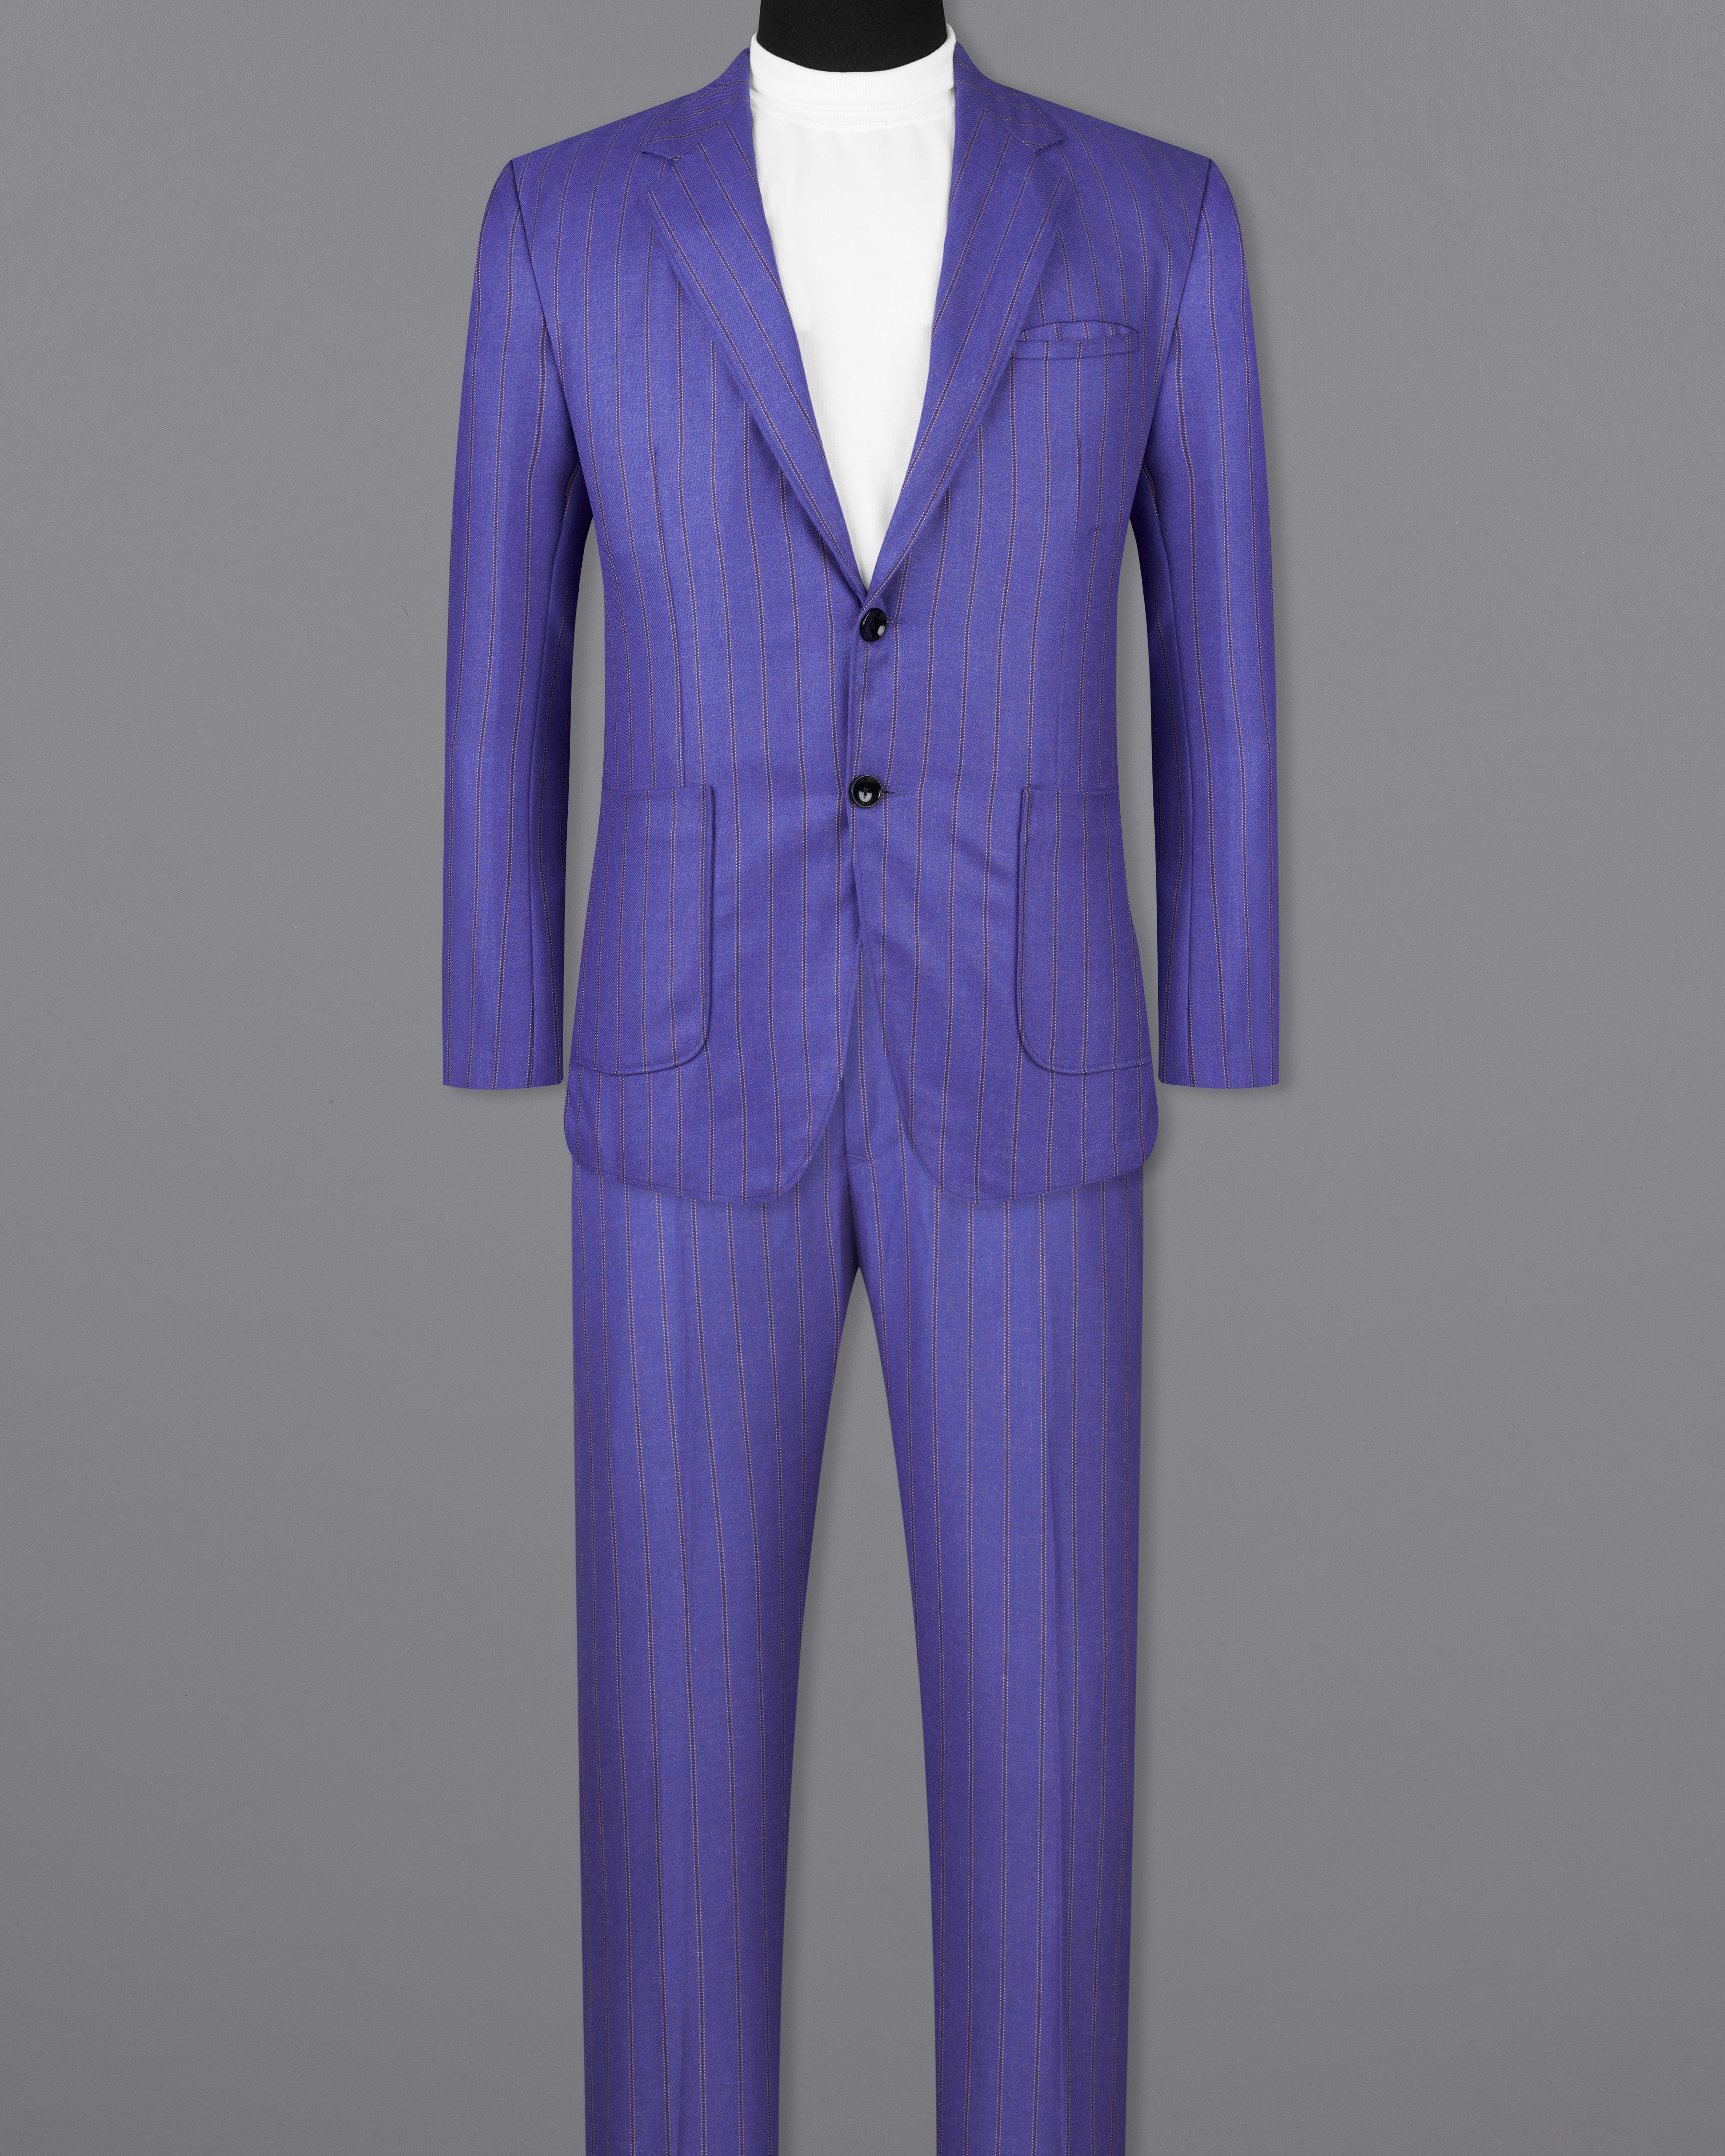 Deluge Blue Striped Single Breasted Suit ST2568-SB-PP-D150-36,ST2568-SB-PP-D150-38,ST2568-SB-PP-D150-40,ST2568-SB-PP-D150-42,ST2568-SB-PP-D150-44,ST2568-SB-PP-D150-46,ST2568-SB-PP-D150-48,ST2568-SB-PP-D150-50,,ST2568-SB-PP-D150-52,ST2568-SB-PP-D150-54,ST2568-SB-PP-D150-56,ST2568-SB-PP-D150-58,ST2568-SB-PP-D150-60